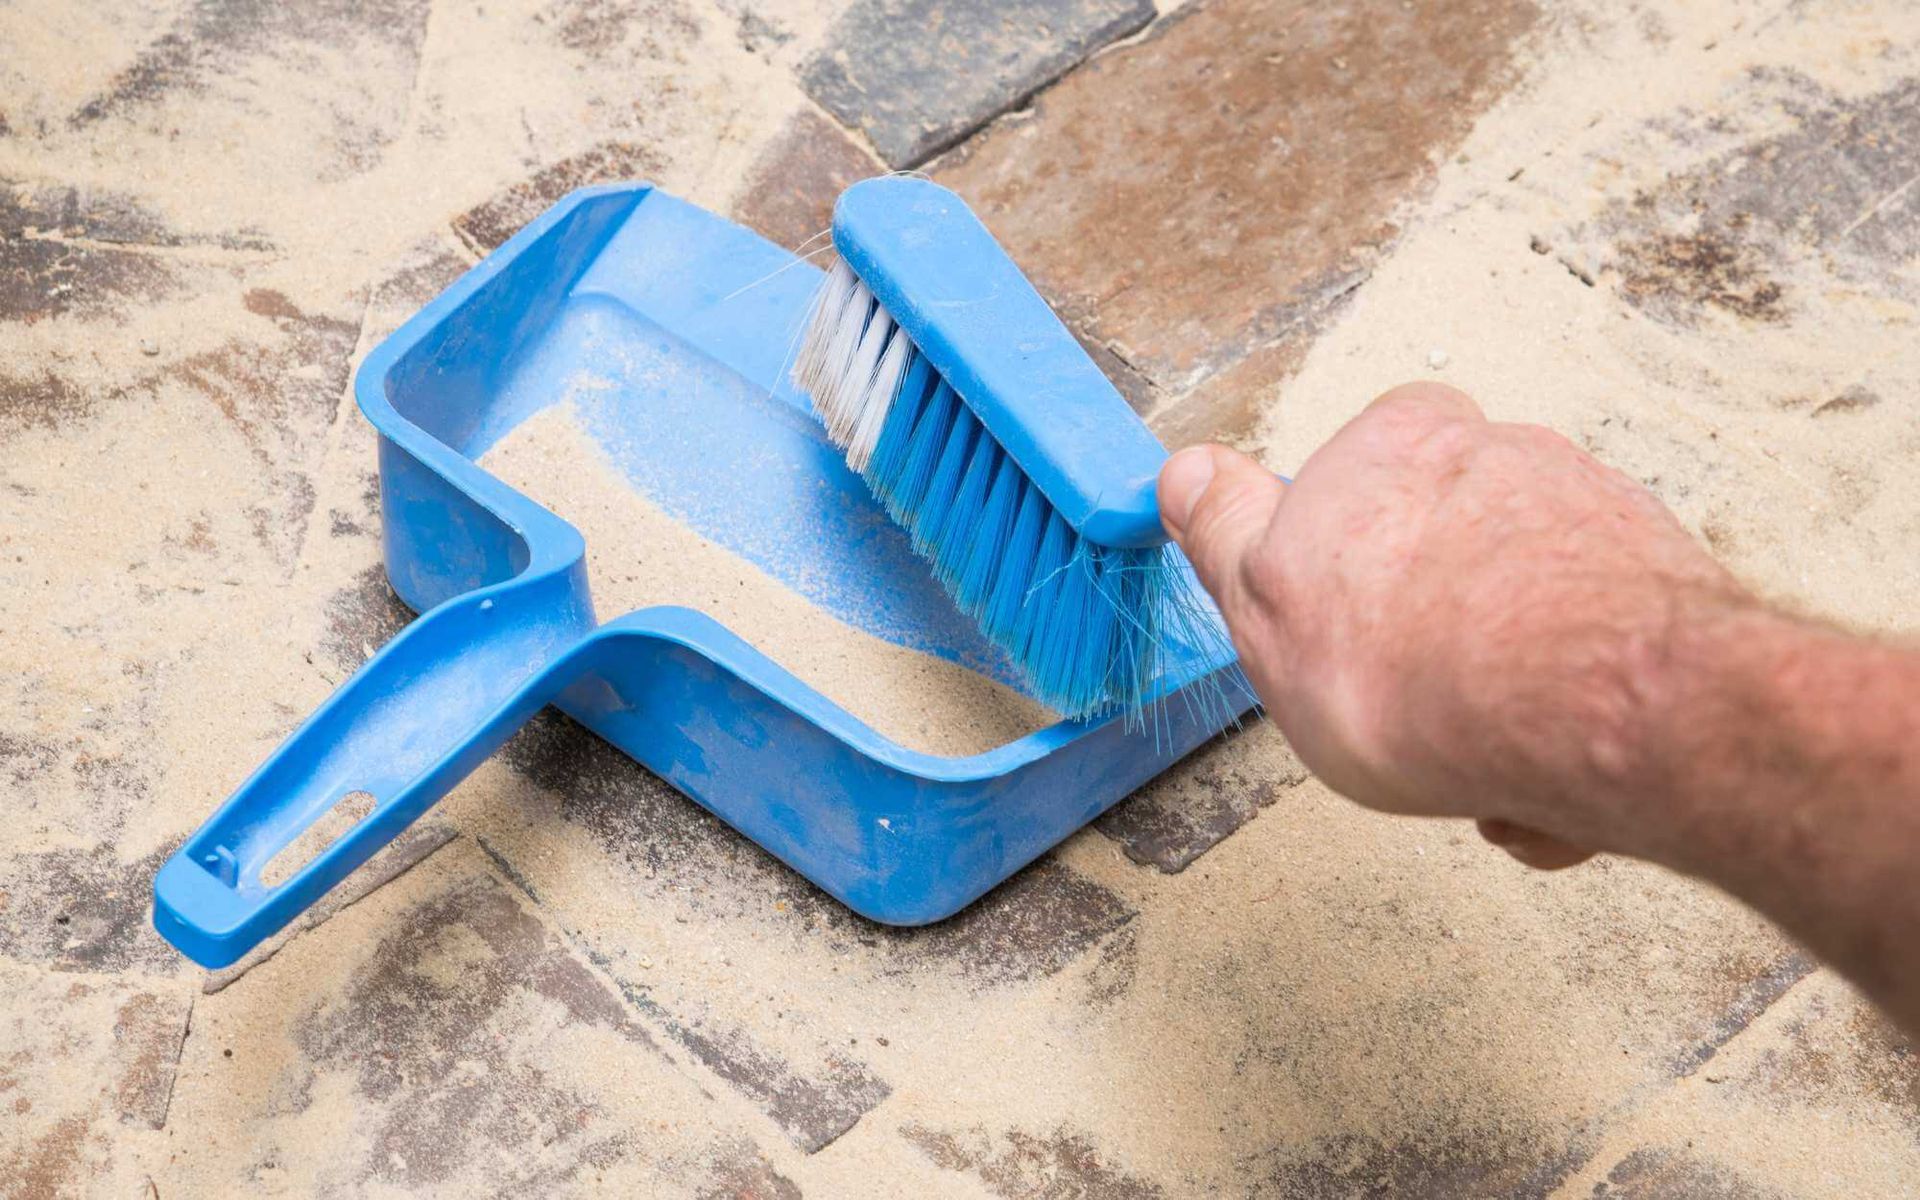 cleaning the paved surface with a handheld dustpan and broom